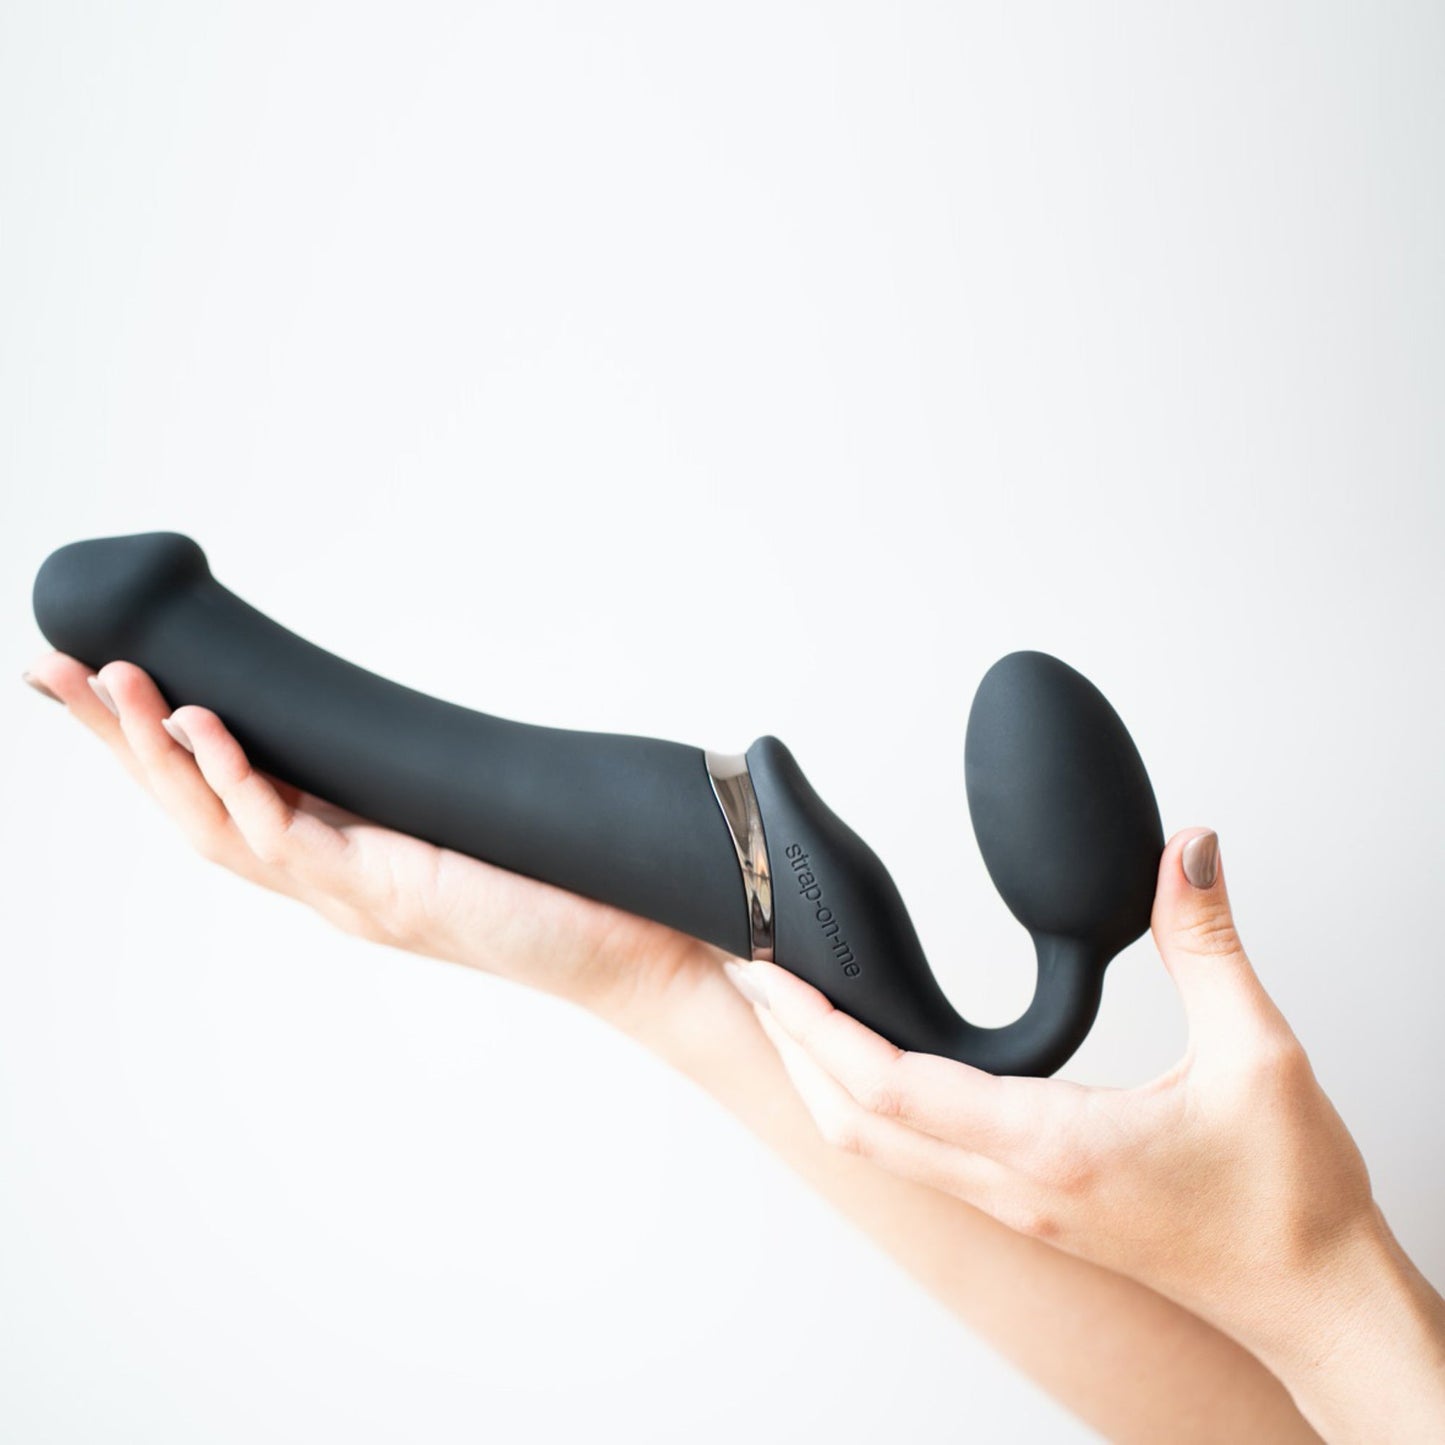 Strap On Me Vibrating Strap-on Remote Controlled 3 Motors - Black - Thorn & Feather